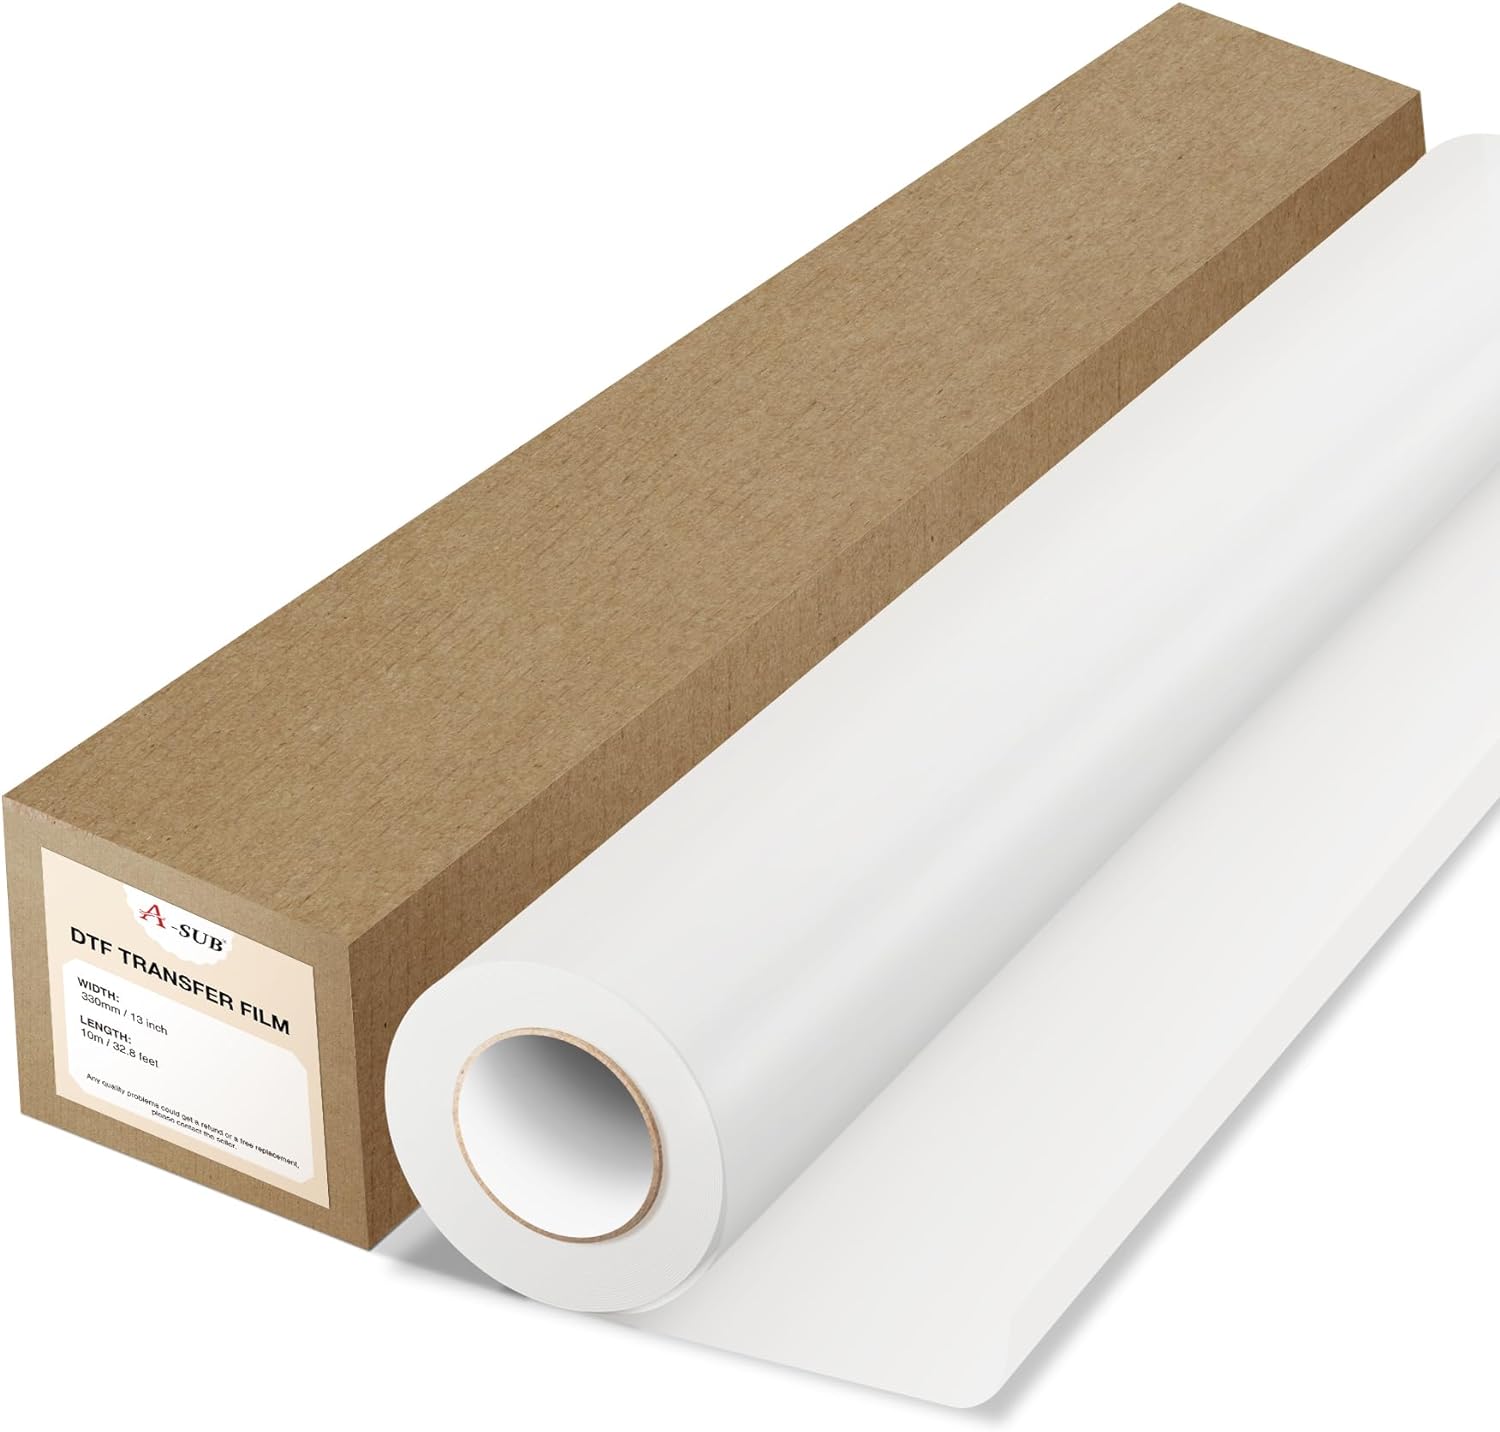 A-SUB DTF Transfer Film Roll, 13 X 32.8ft (Double Sided Matte)